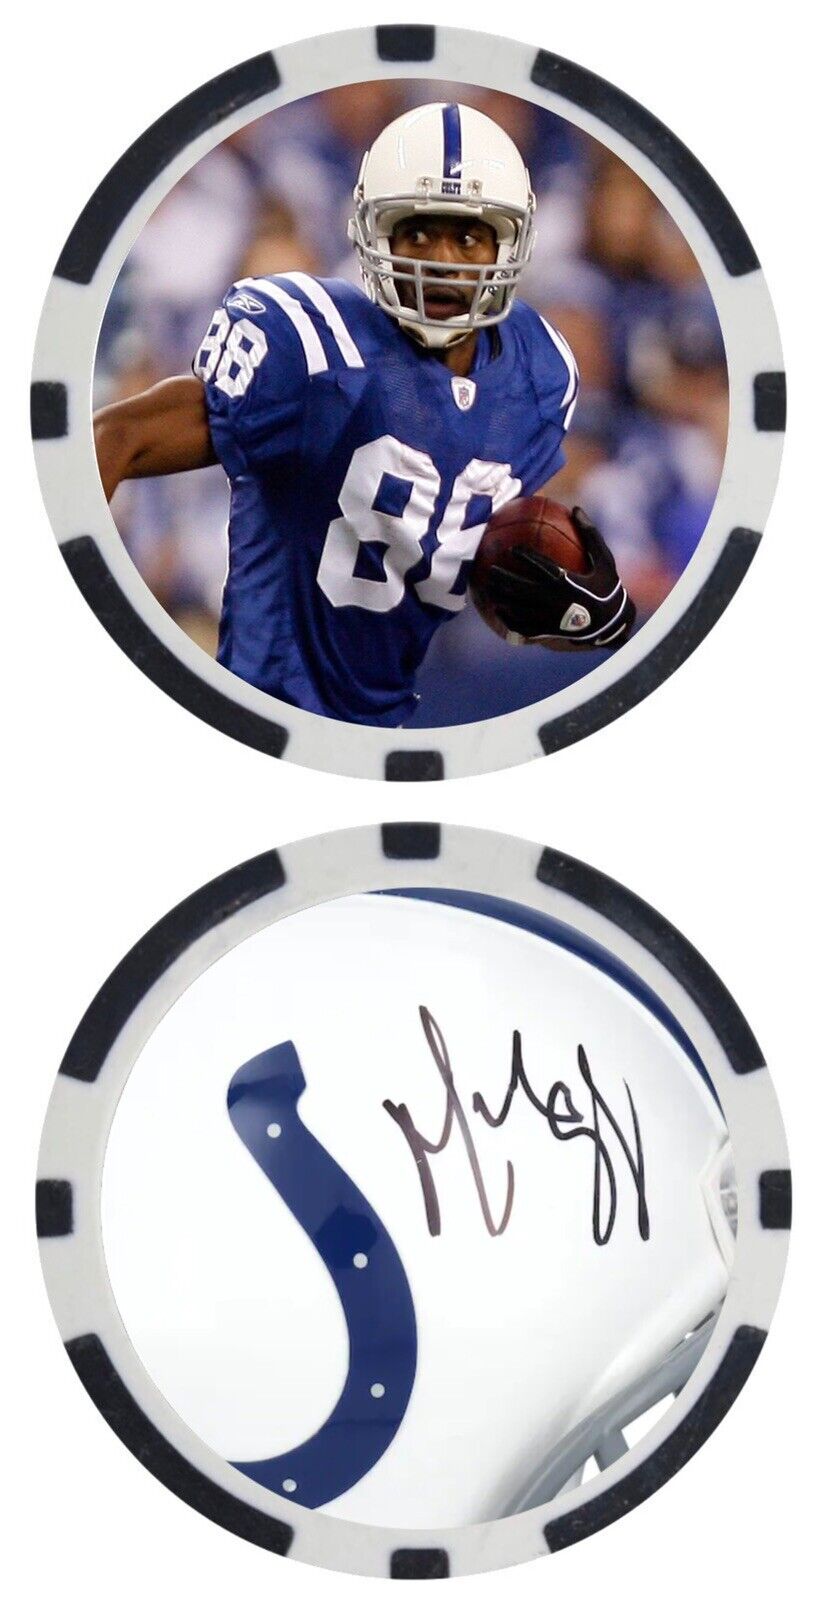 MARVIN HARRISON - INDIANAPOLIS COLTS - POKER CHIP/BALL MARKER *SIGNED/AUTO***